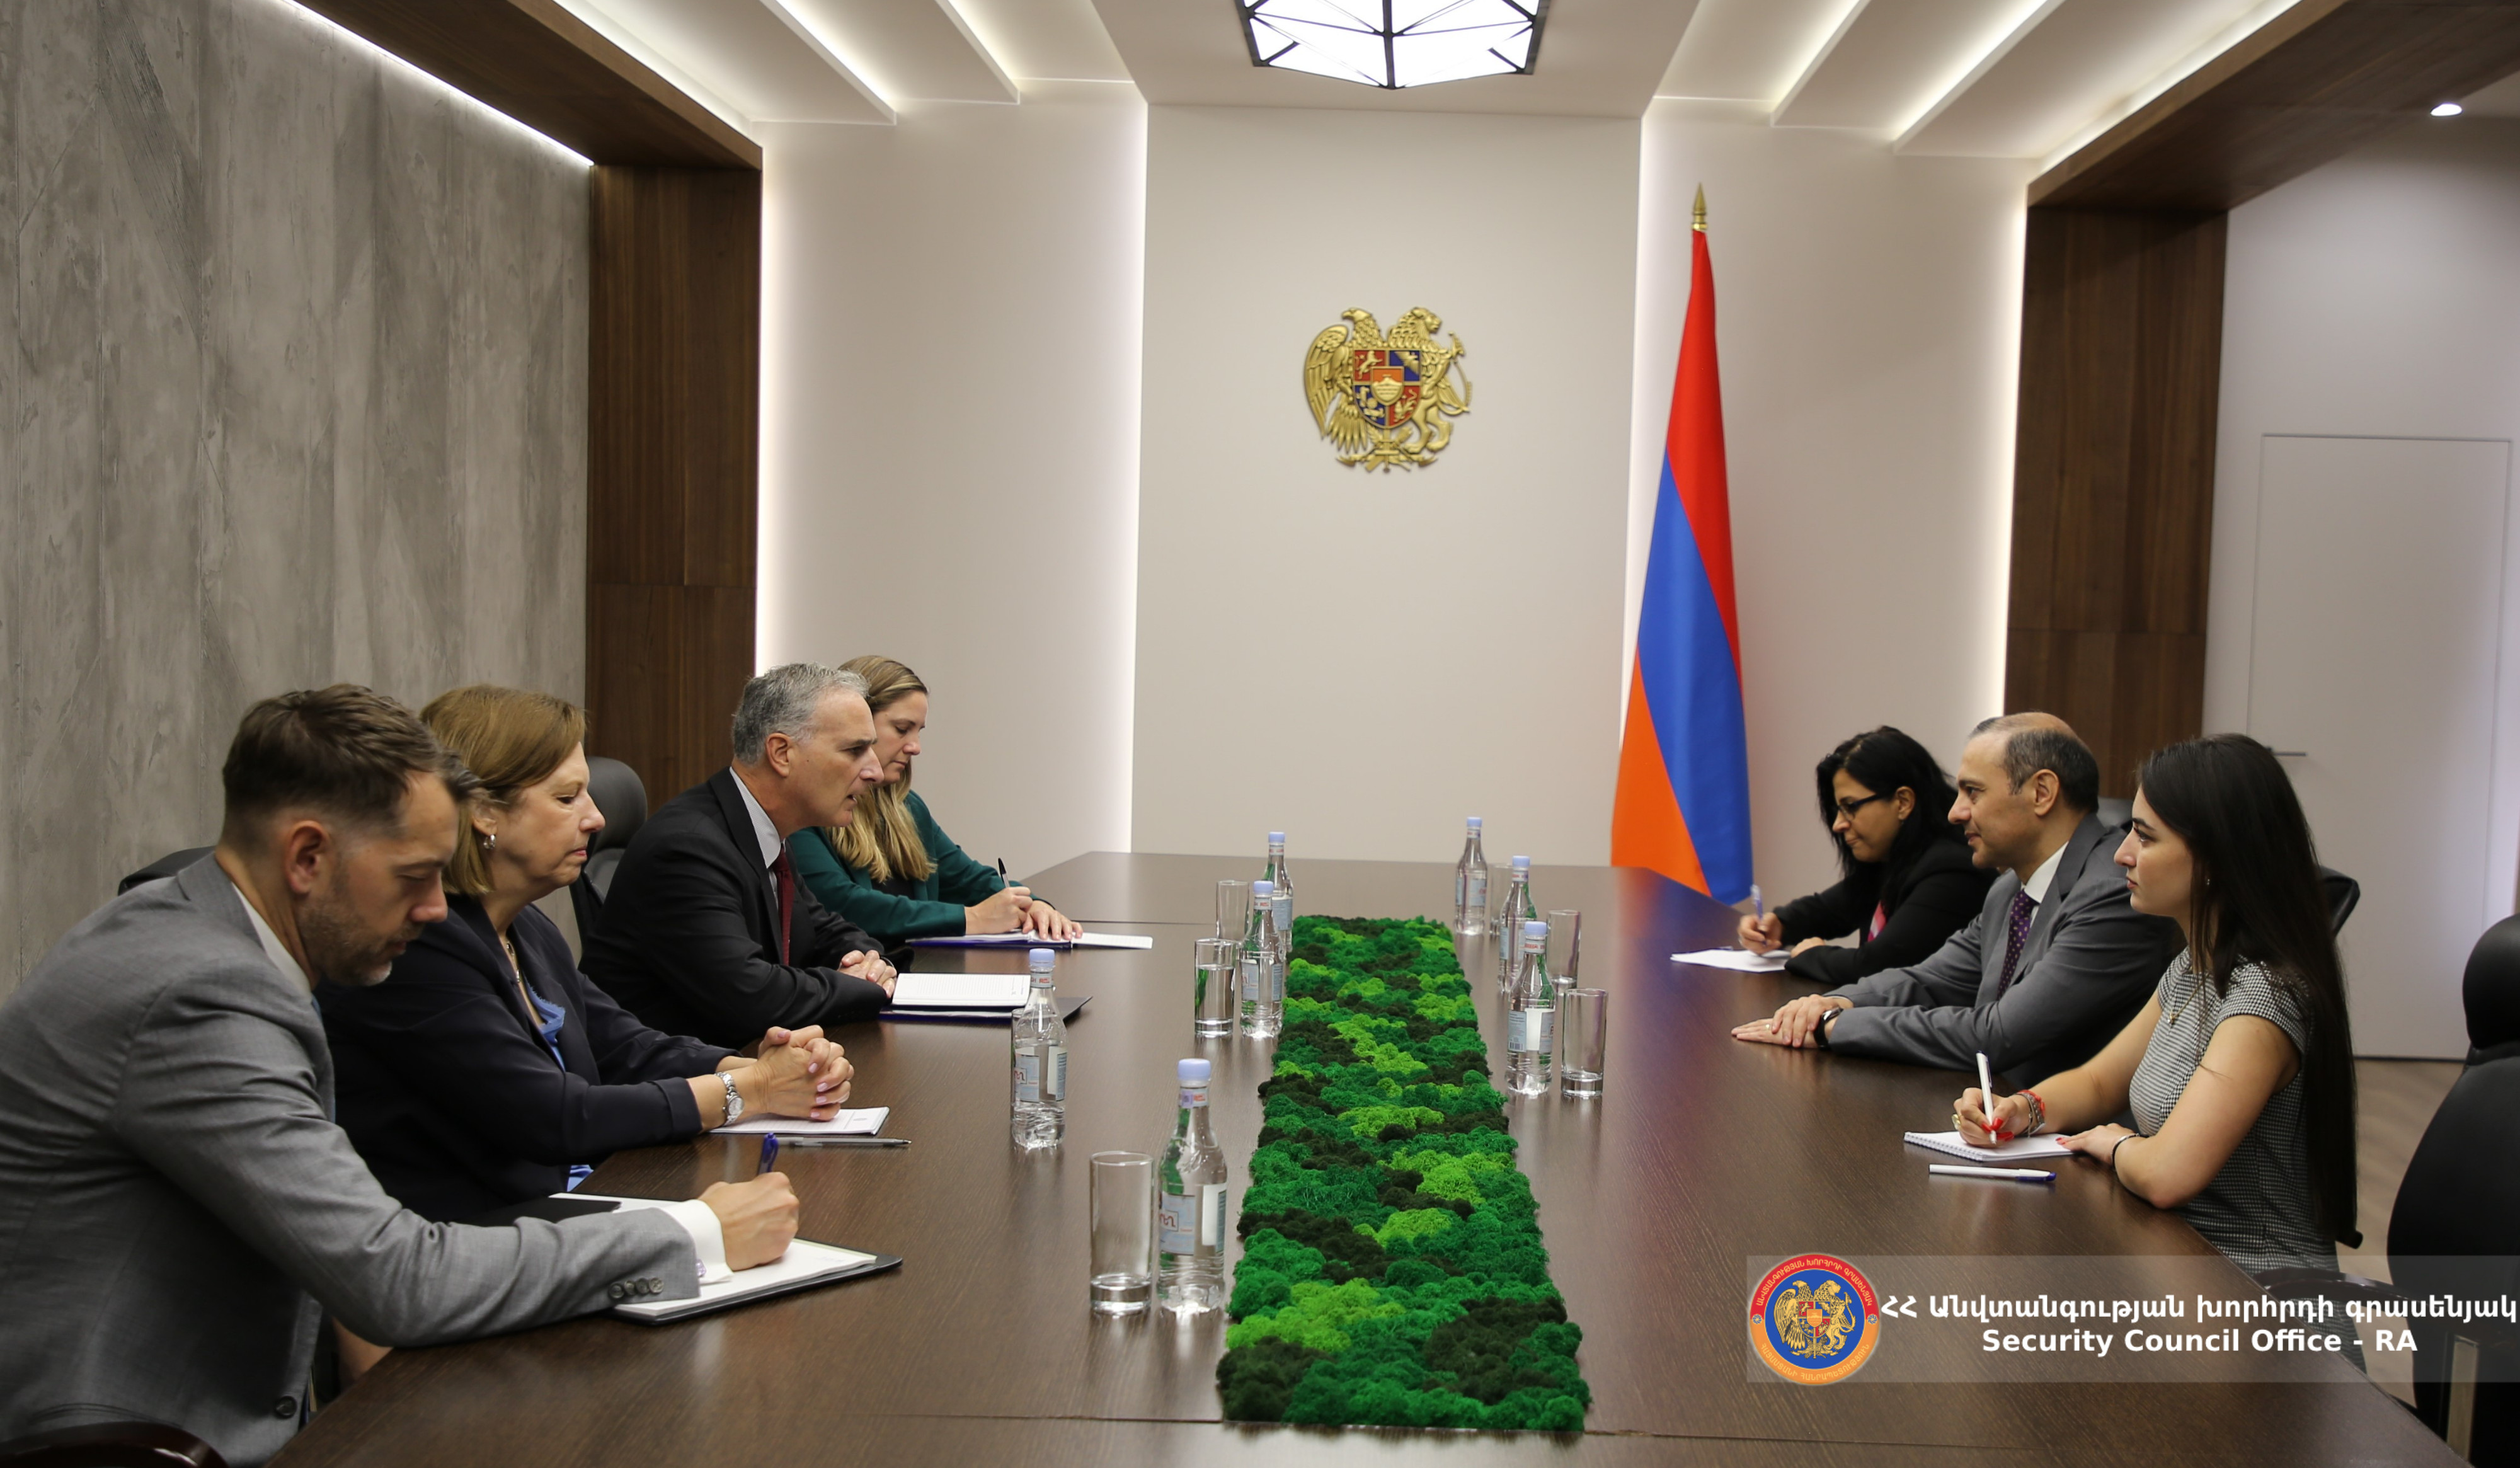 Secretary of Armenia’s Security Council and Louis Bono discuss regional security and stability